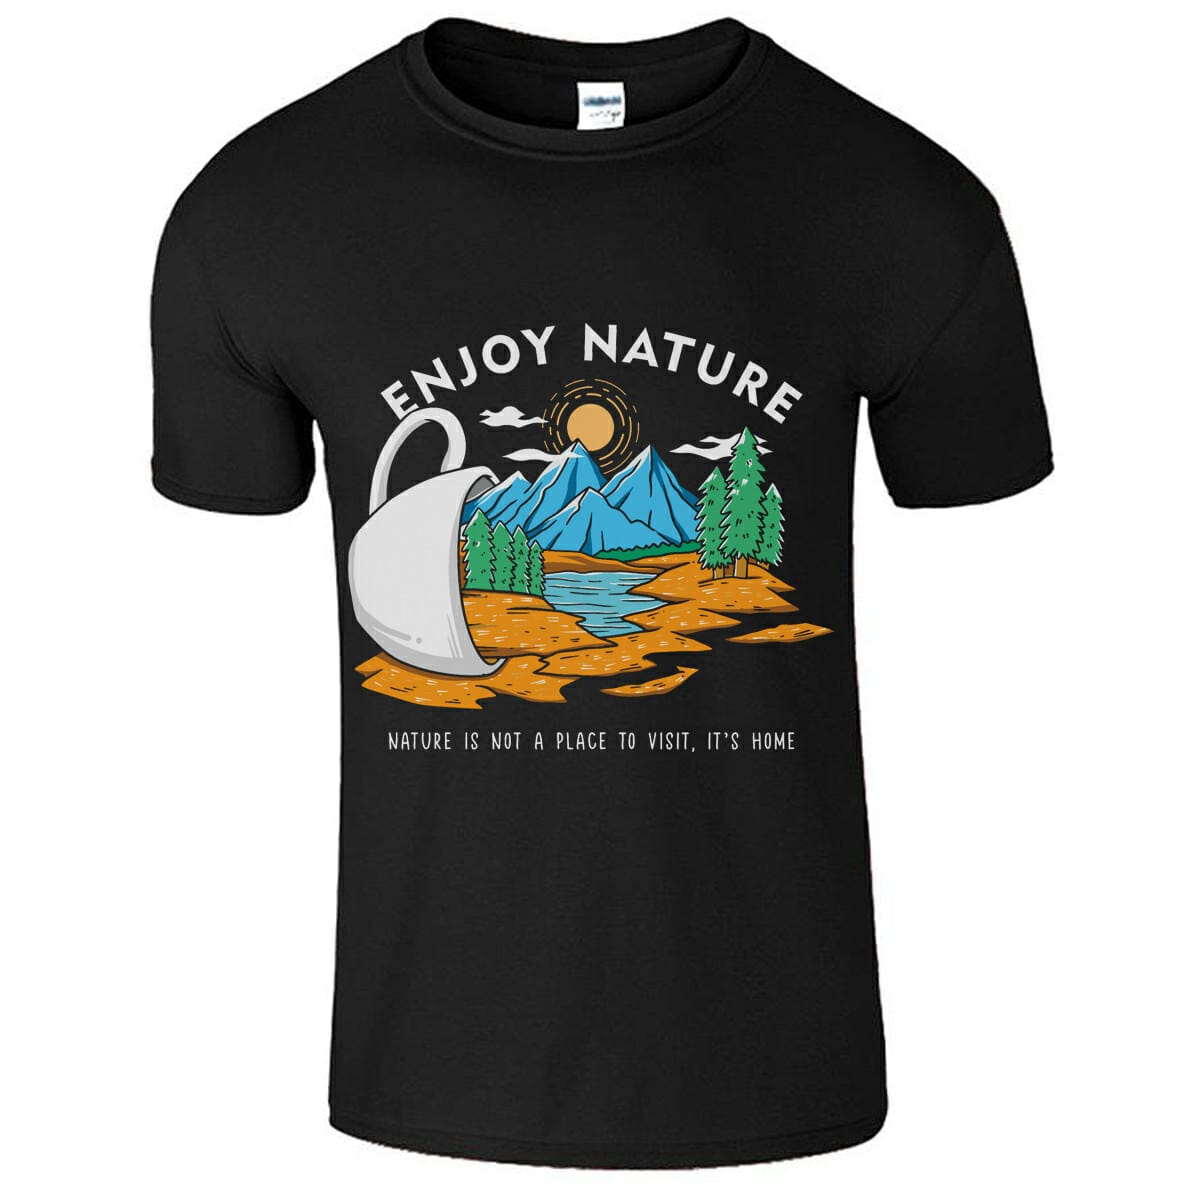 Enjoy Nature - Nature Is Not a Place To Visit It's Home T-Shirt Design